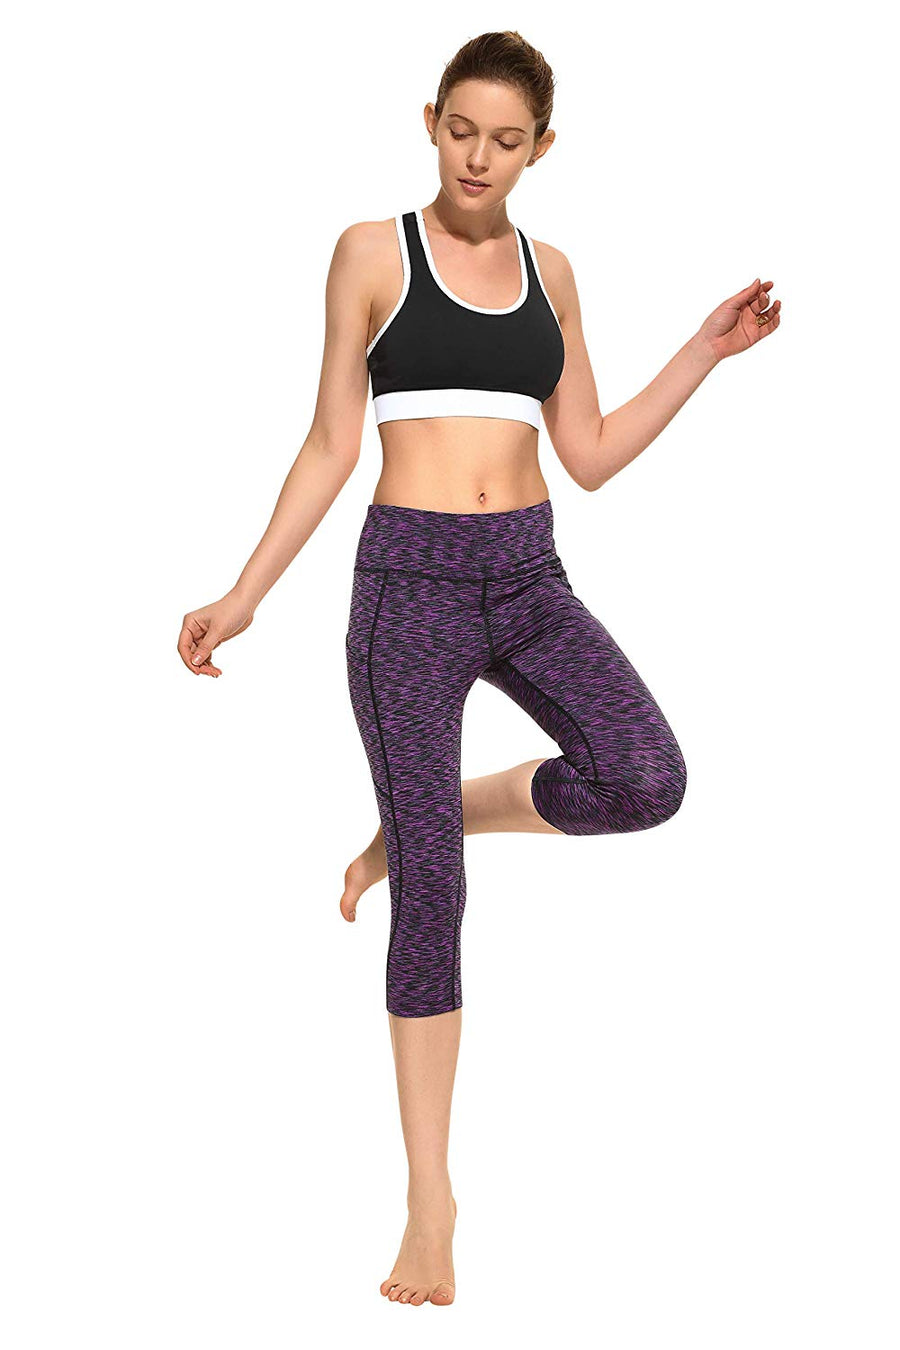 CYZ Women's Space-Dyed Tummy Control Yoga Workout Leggings with Cell Phone Pocket